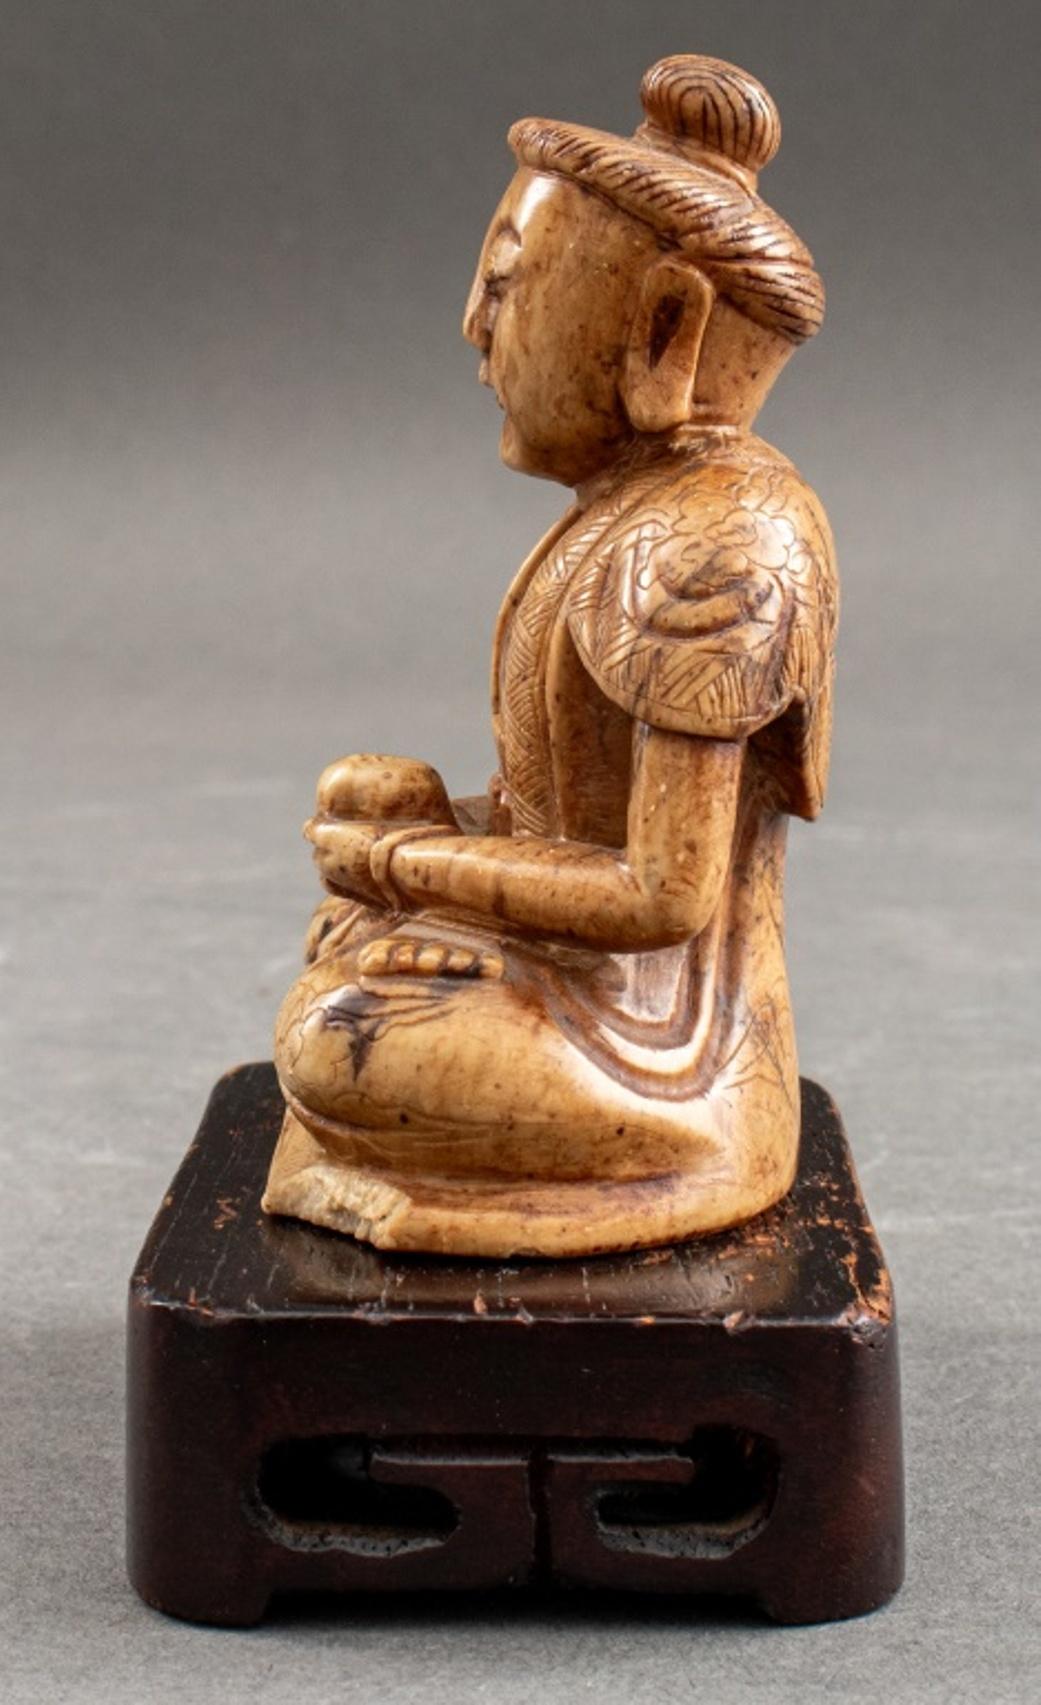 Hand-Carved Japanese Carved Jade Buddha Sculpture For Sale